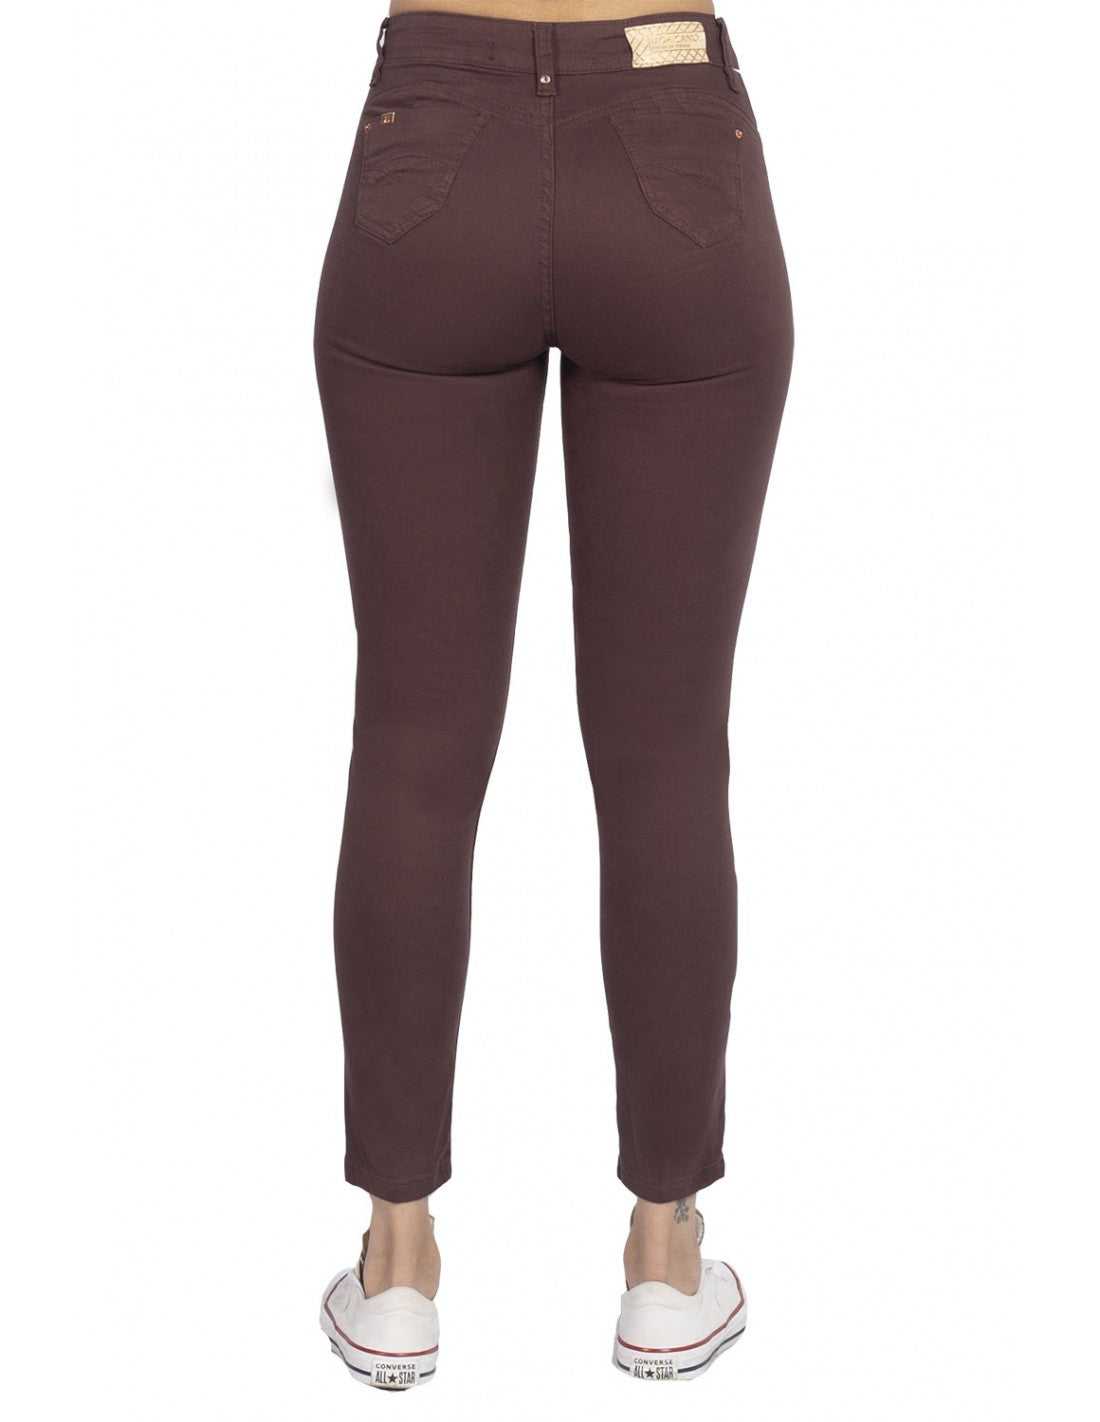 Jeans Mujer Tobillero 3140 Chocolate